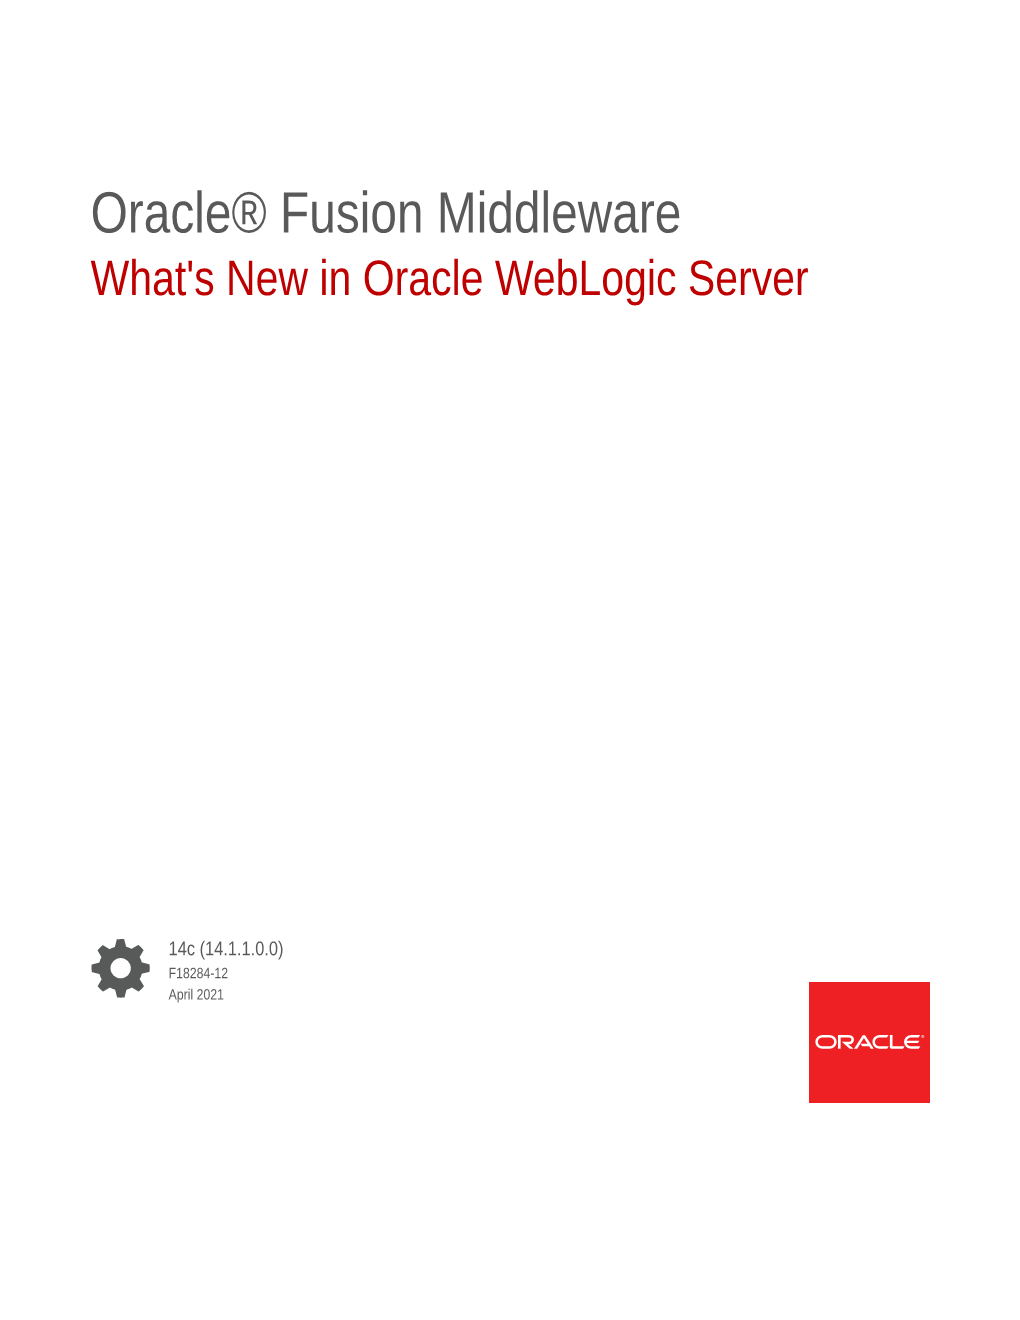 What's New in Oracle Weblogic Server